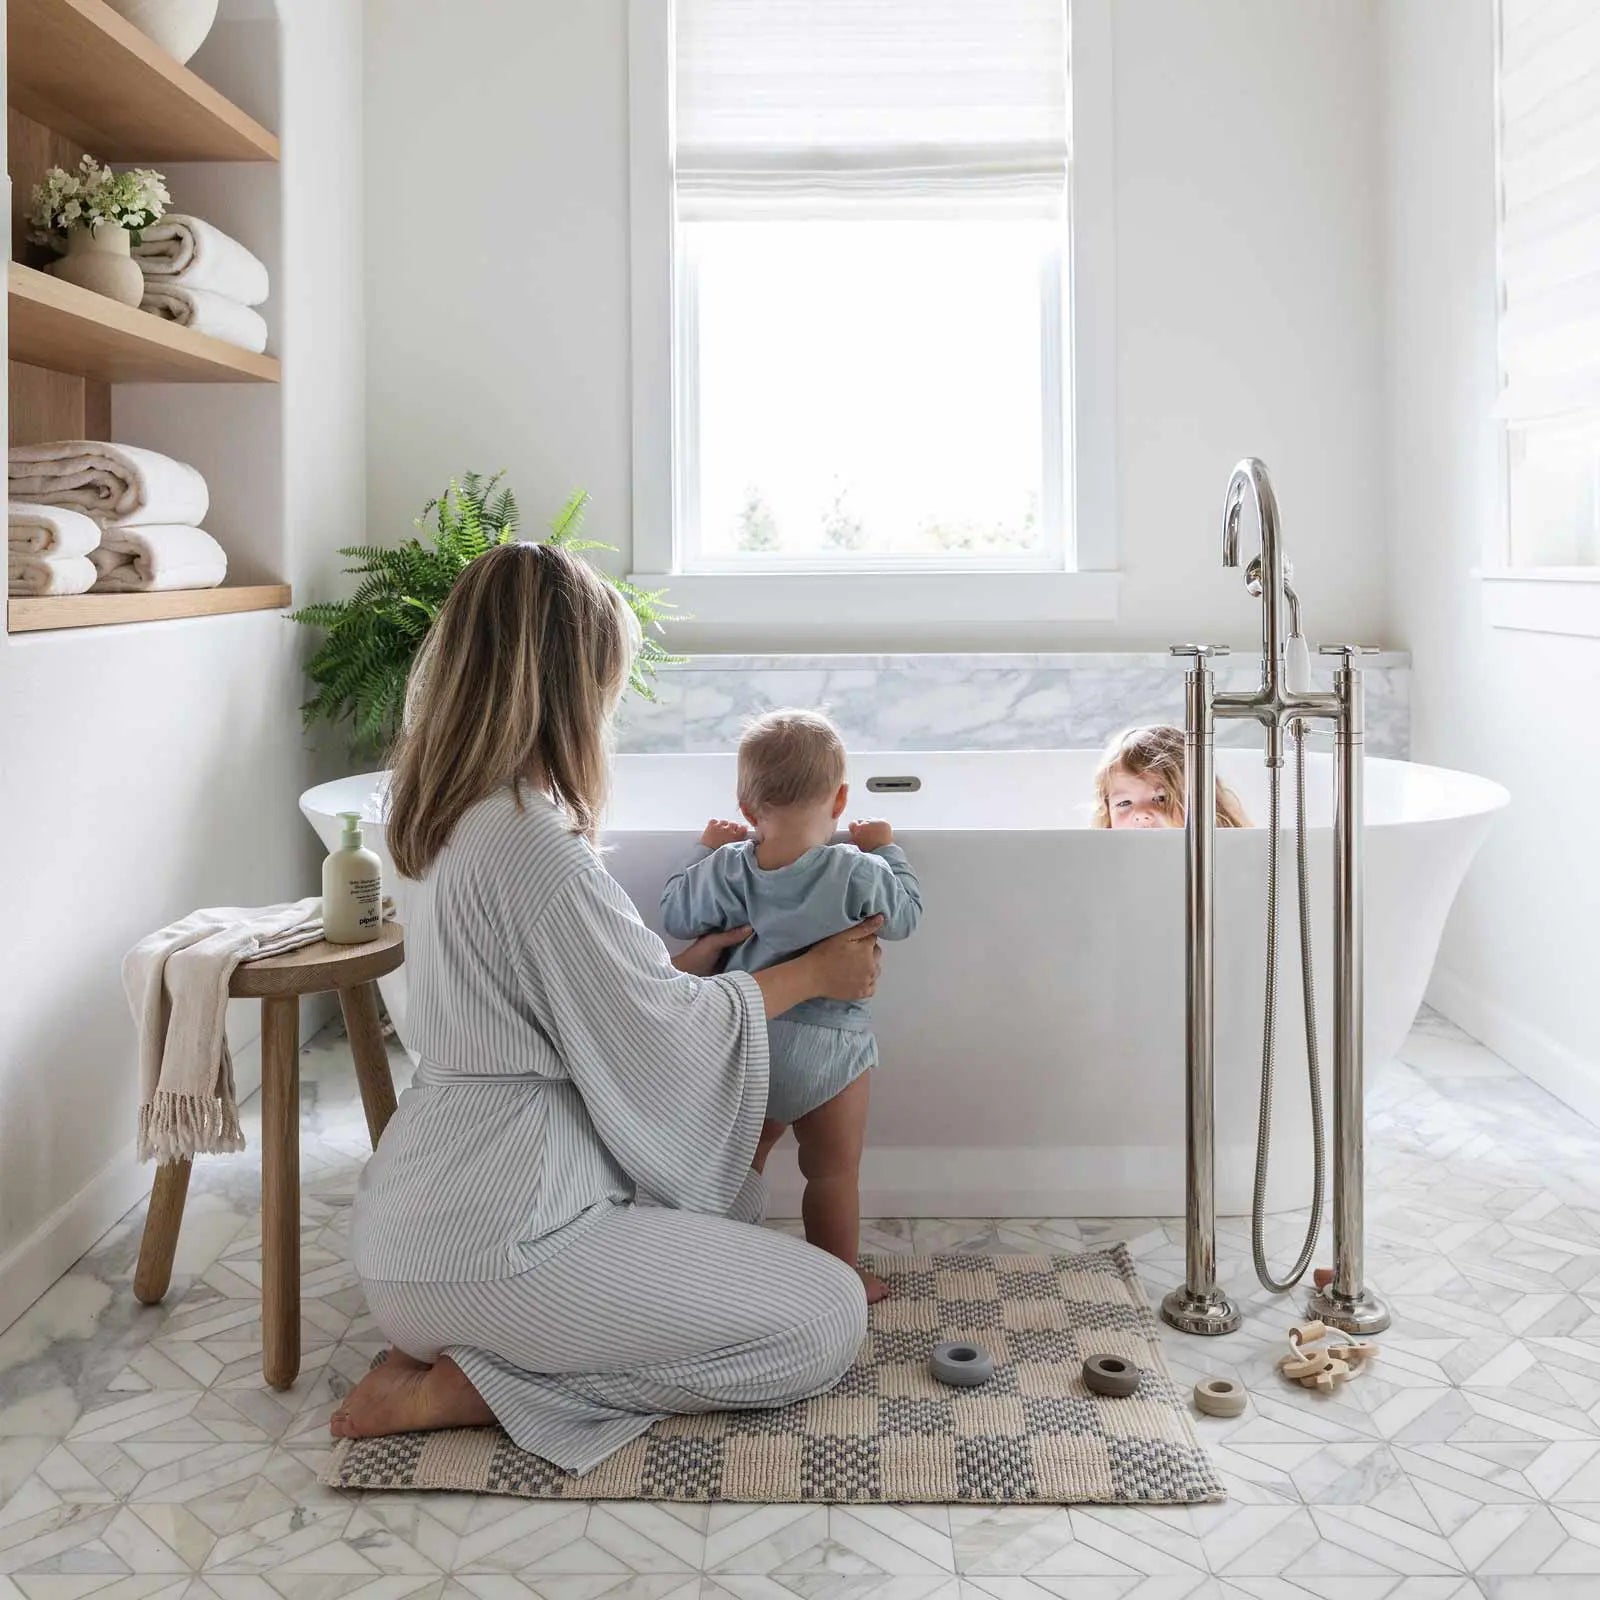 Harbor grey grey and white checker print bath mat shown with moms feet standing on the mat in front of a vanity and baby pulling itself up on the vanity